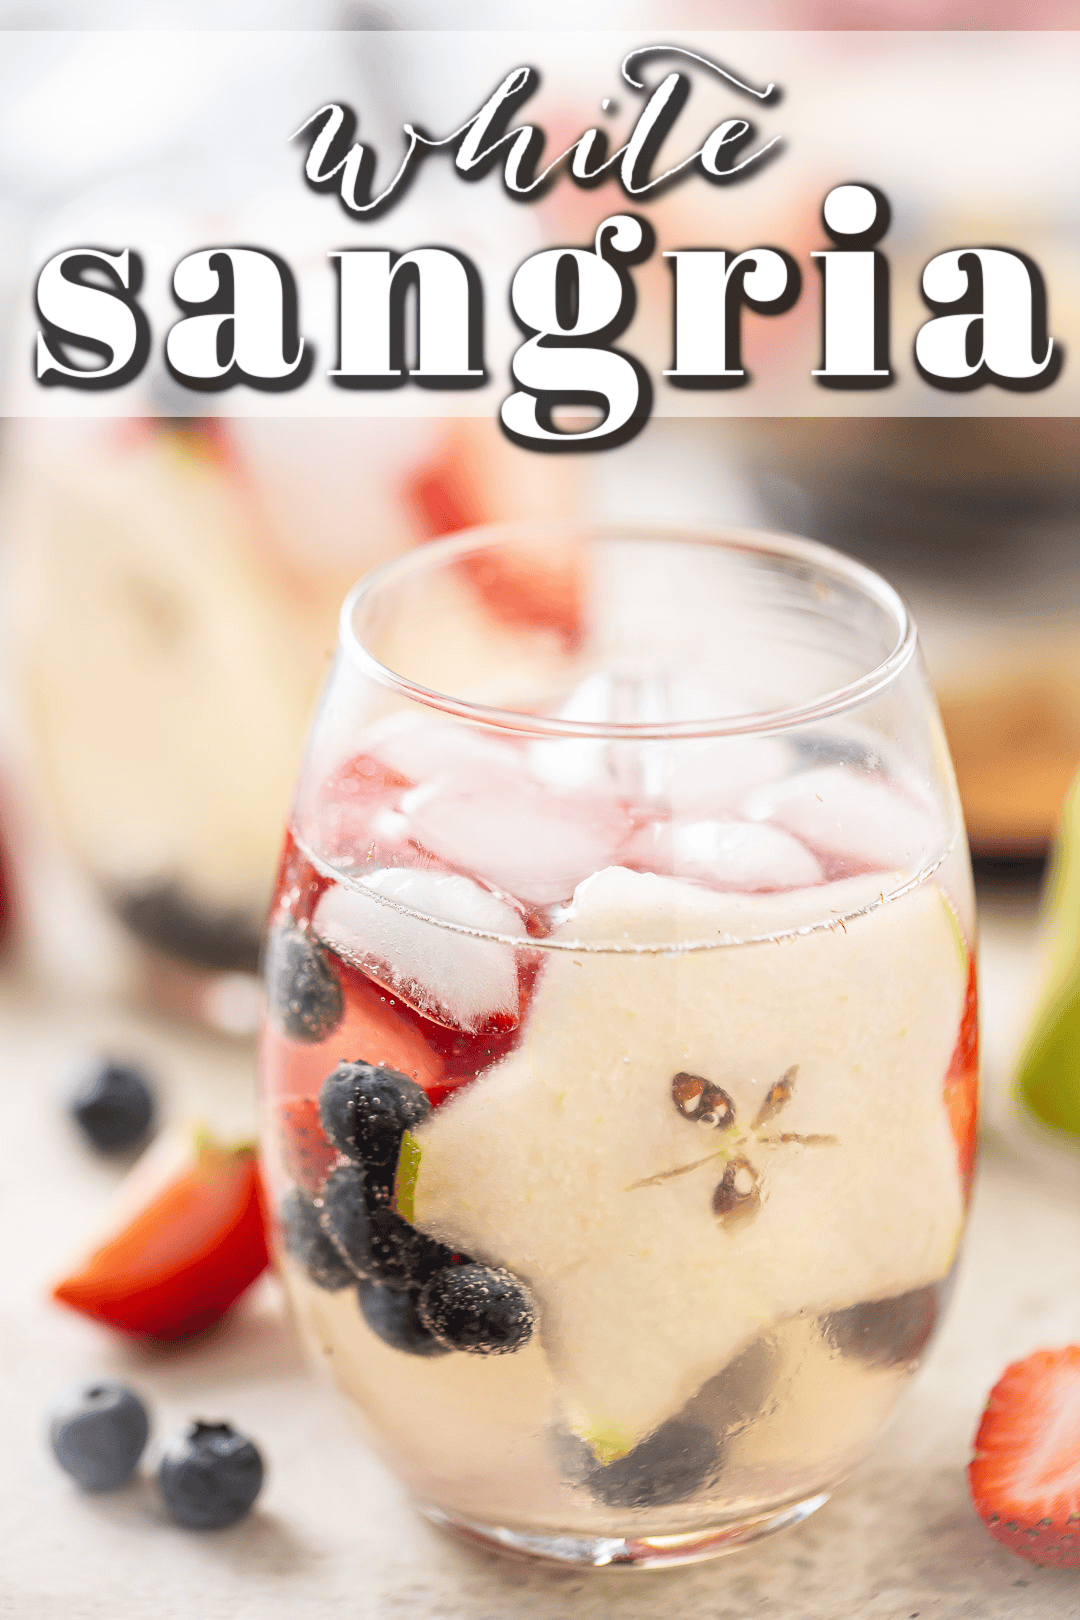 White sangria in a glass with strawberries, blueberries, and pear.